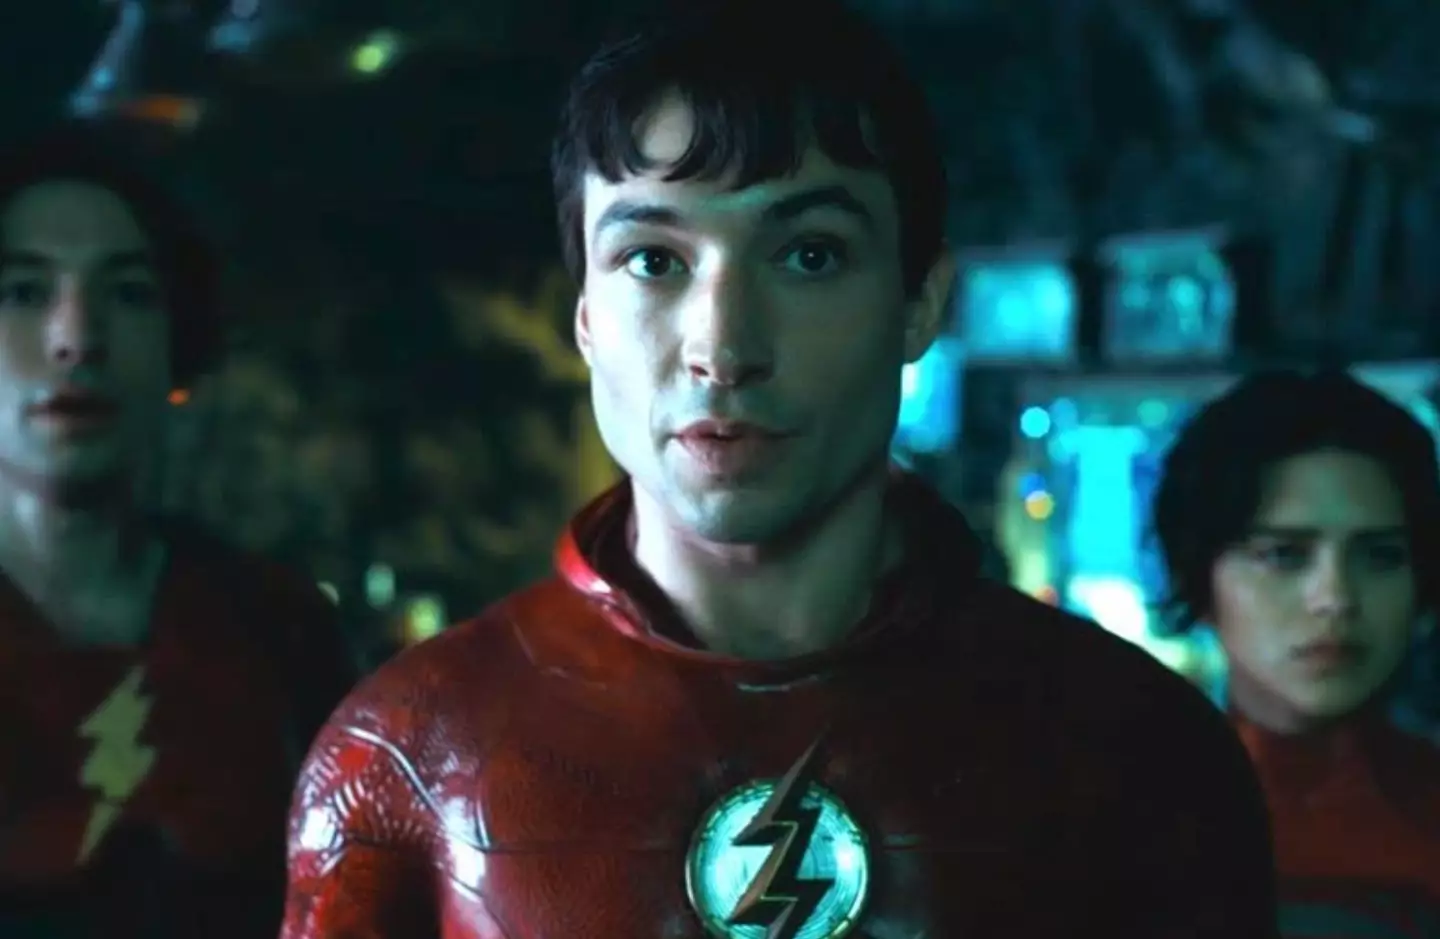 A debate has begun online as to whether or not Elliot Page should replace Ezra Miller as The Flash.